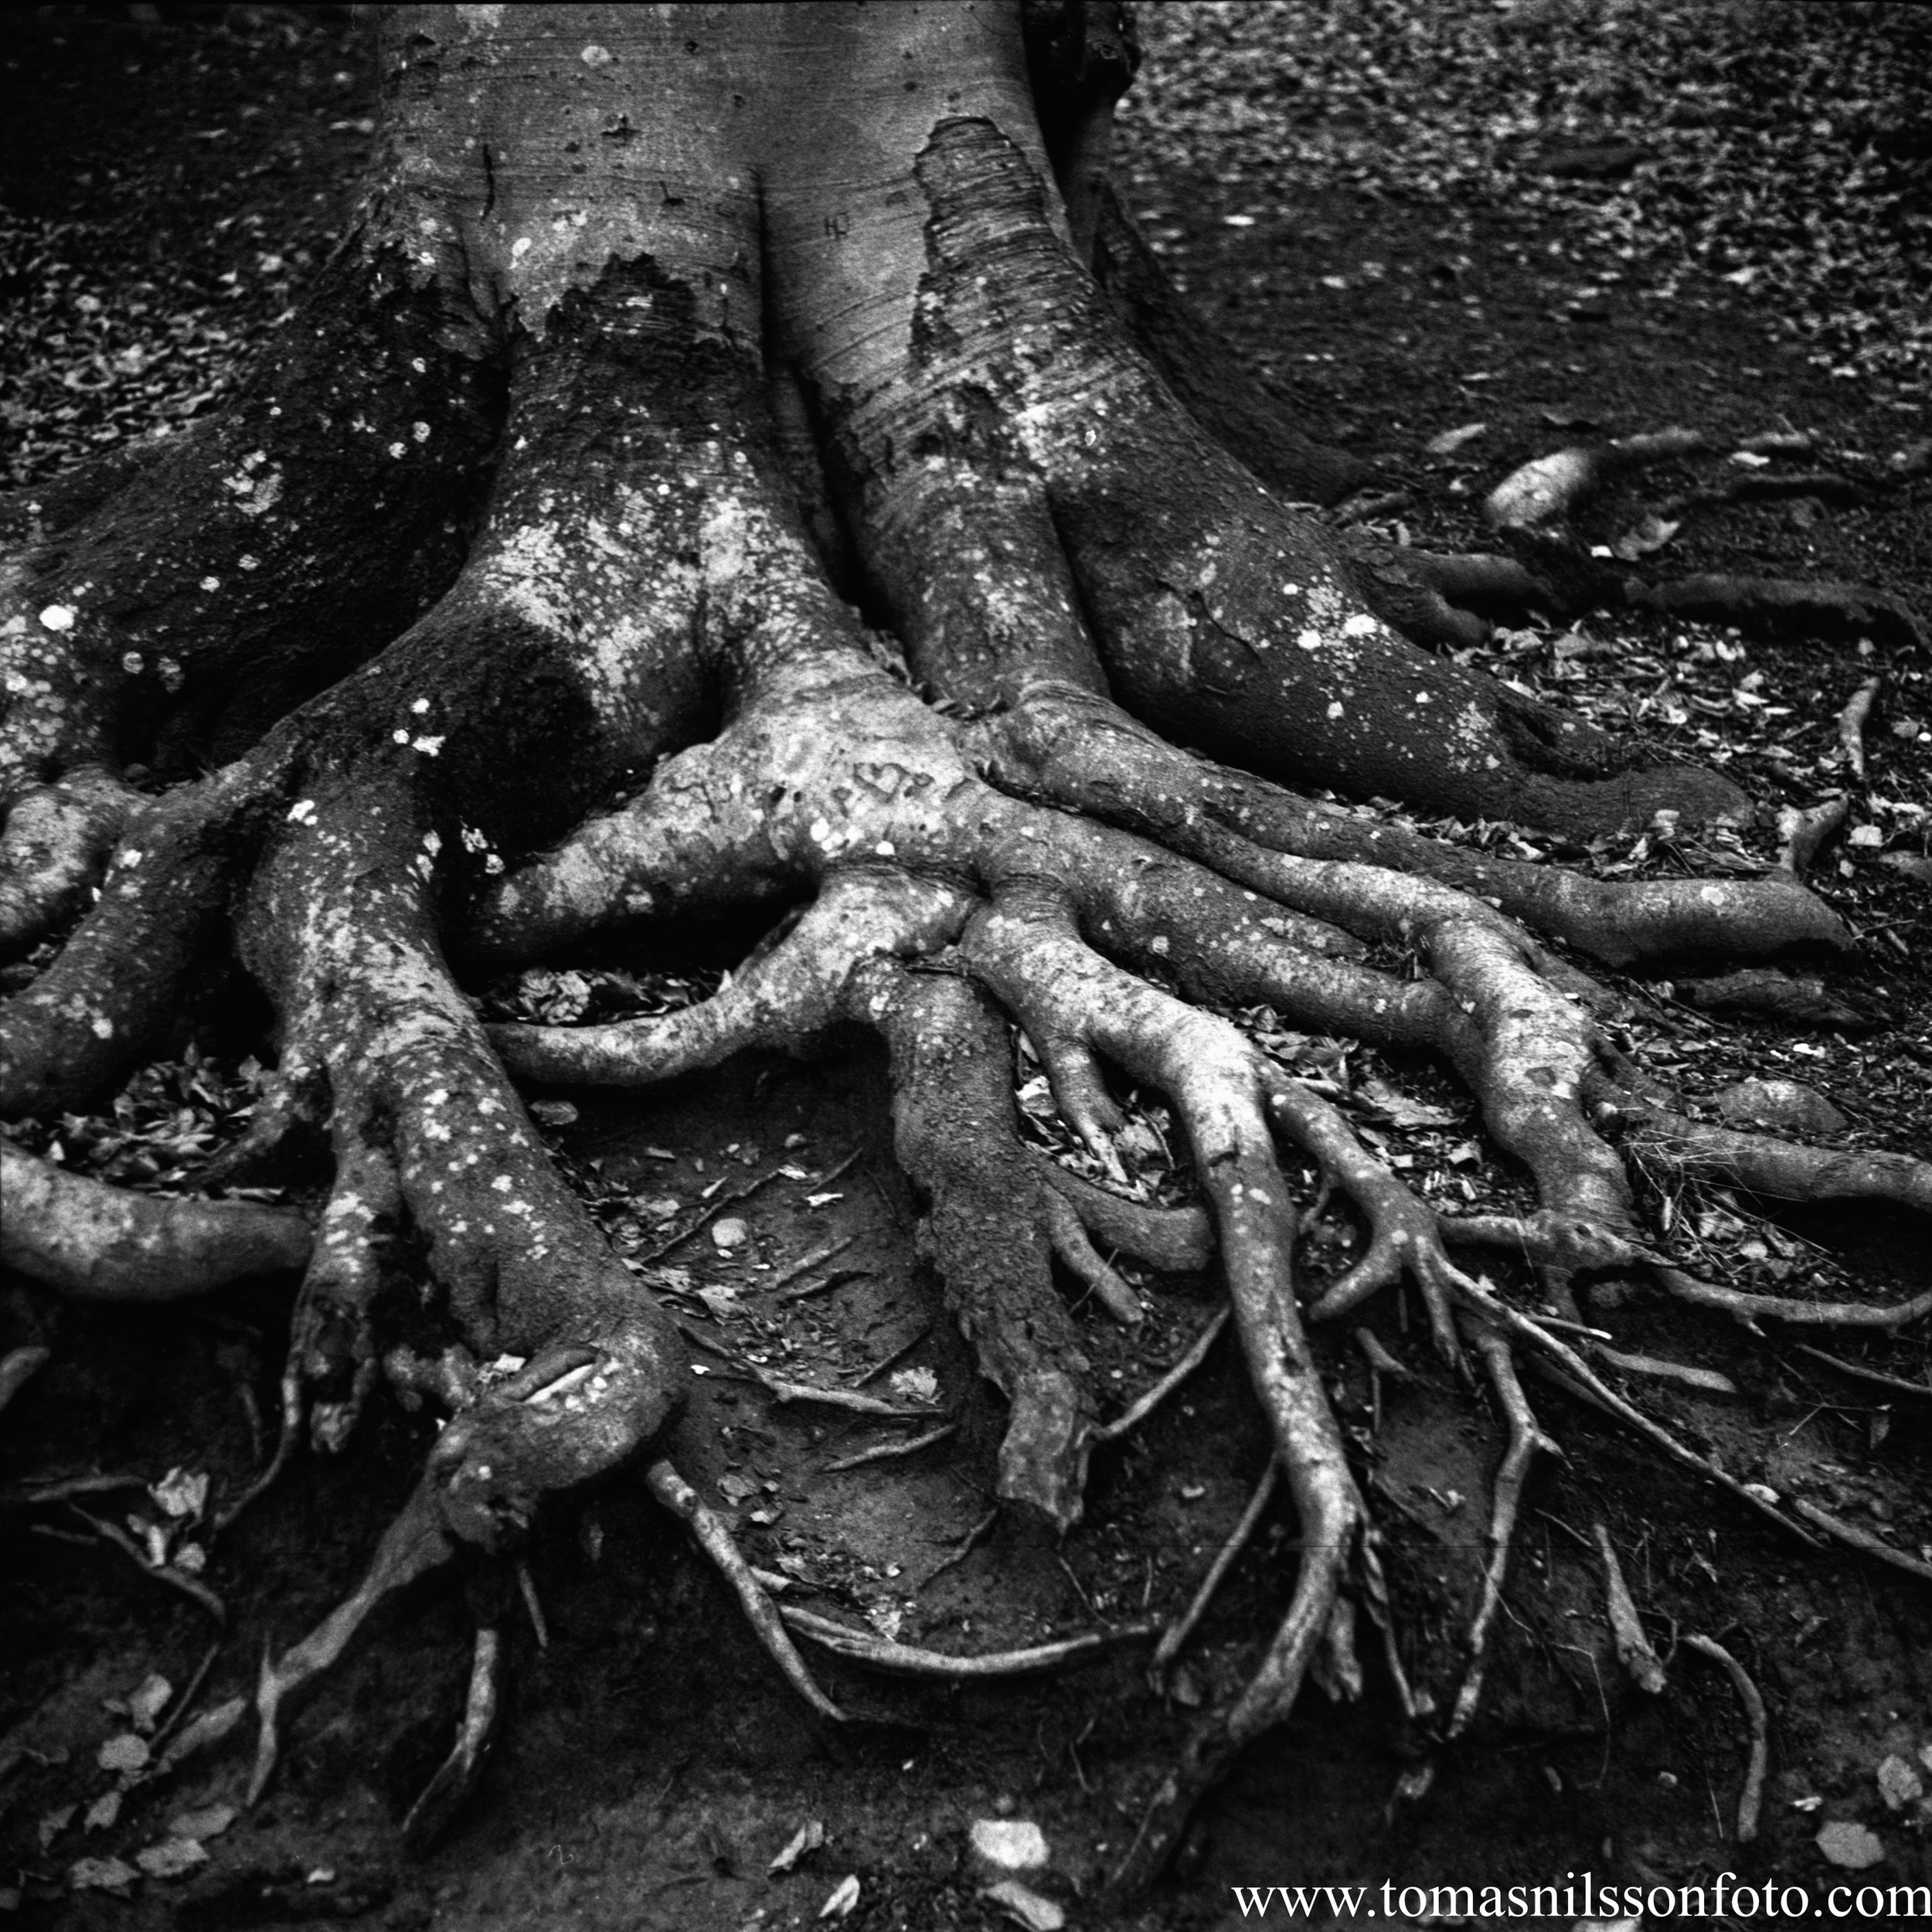 Day 22 - January 22: Roots